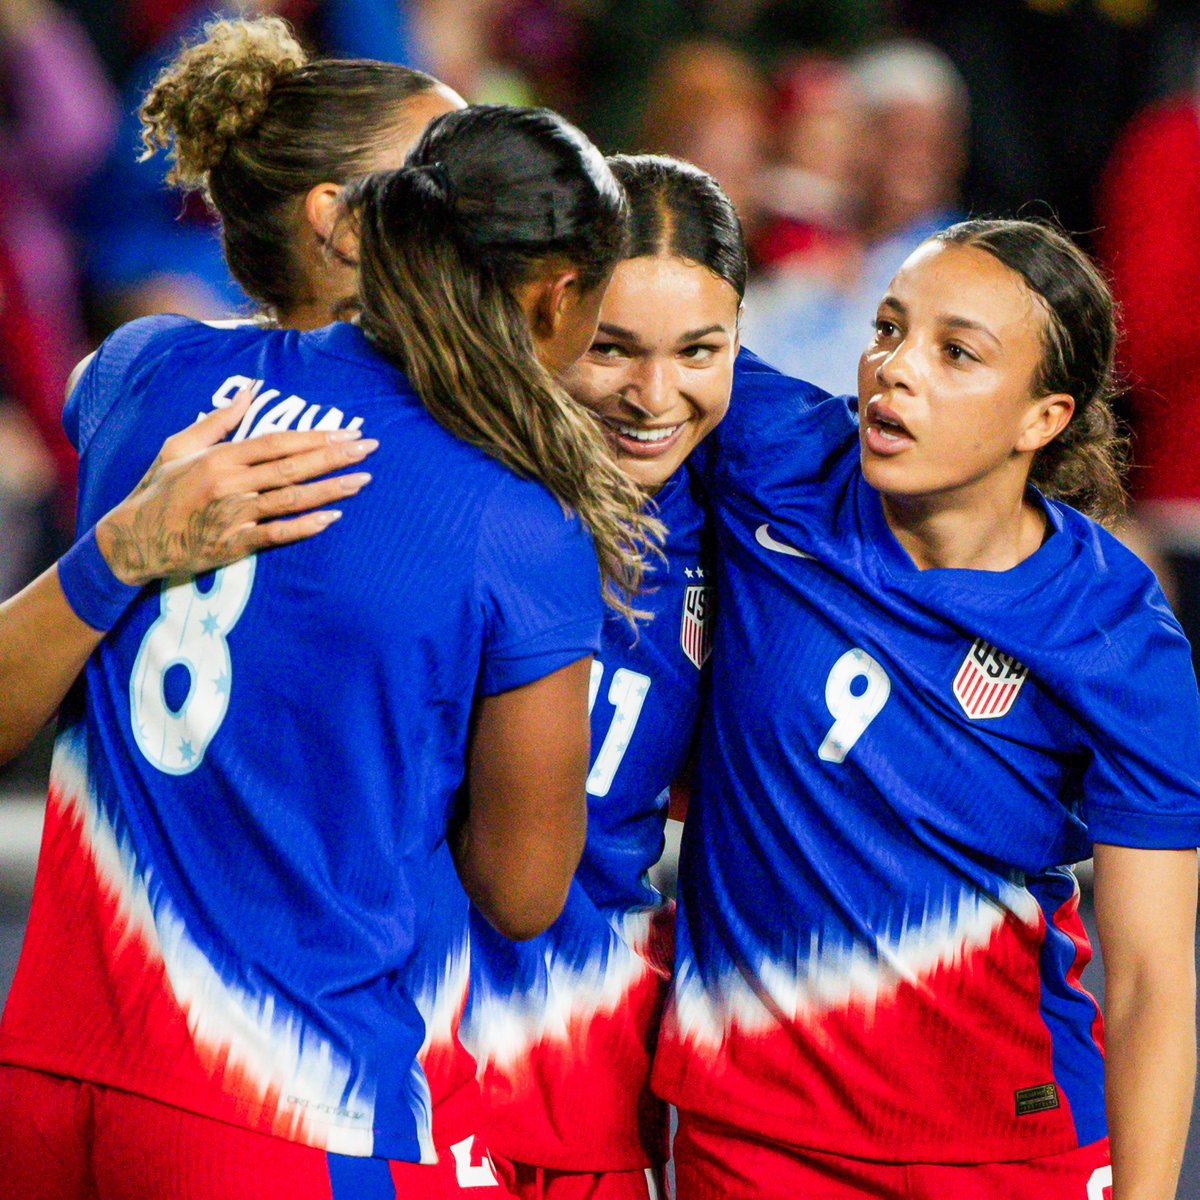 The USWNT will face Costa Rica in their Olympic send-off match on July 16 in DC 🇺🇸 Watch the match live on TNT/Max 📺